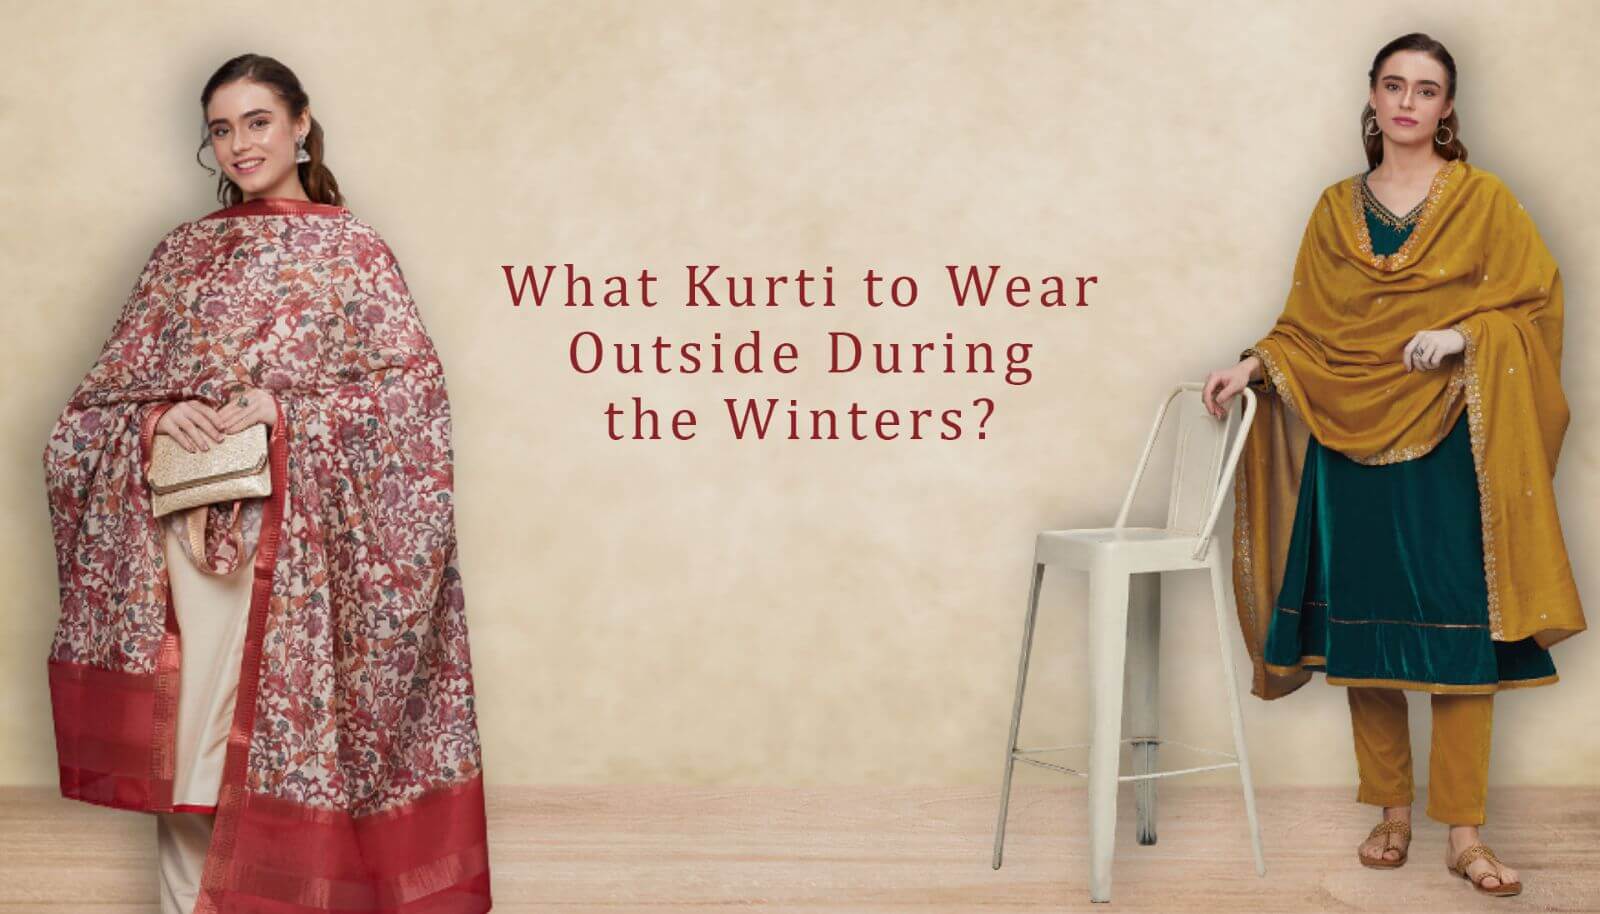 What Kurti to Wear Outside During the Winters?